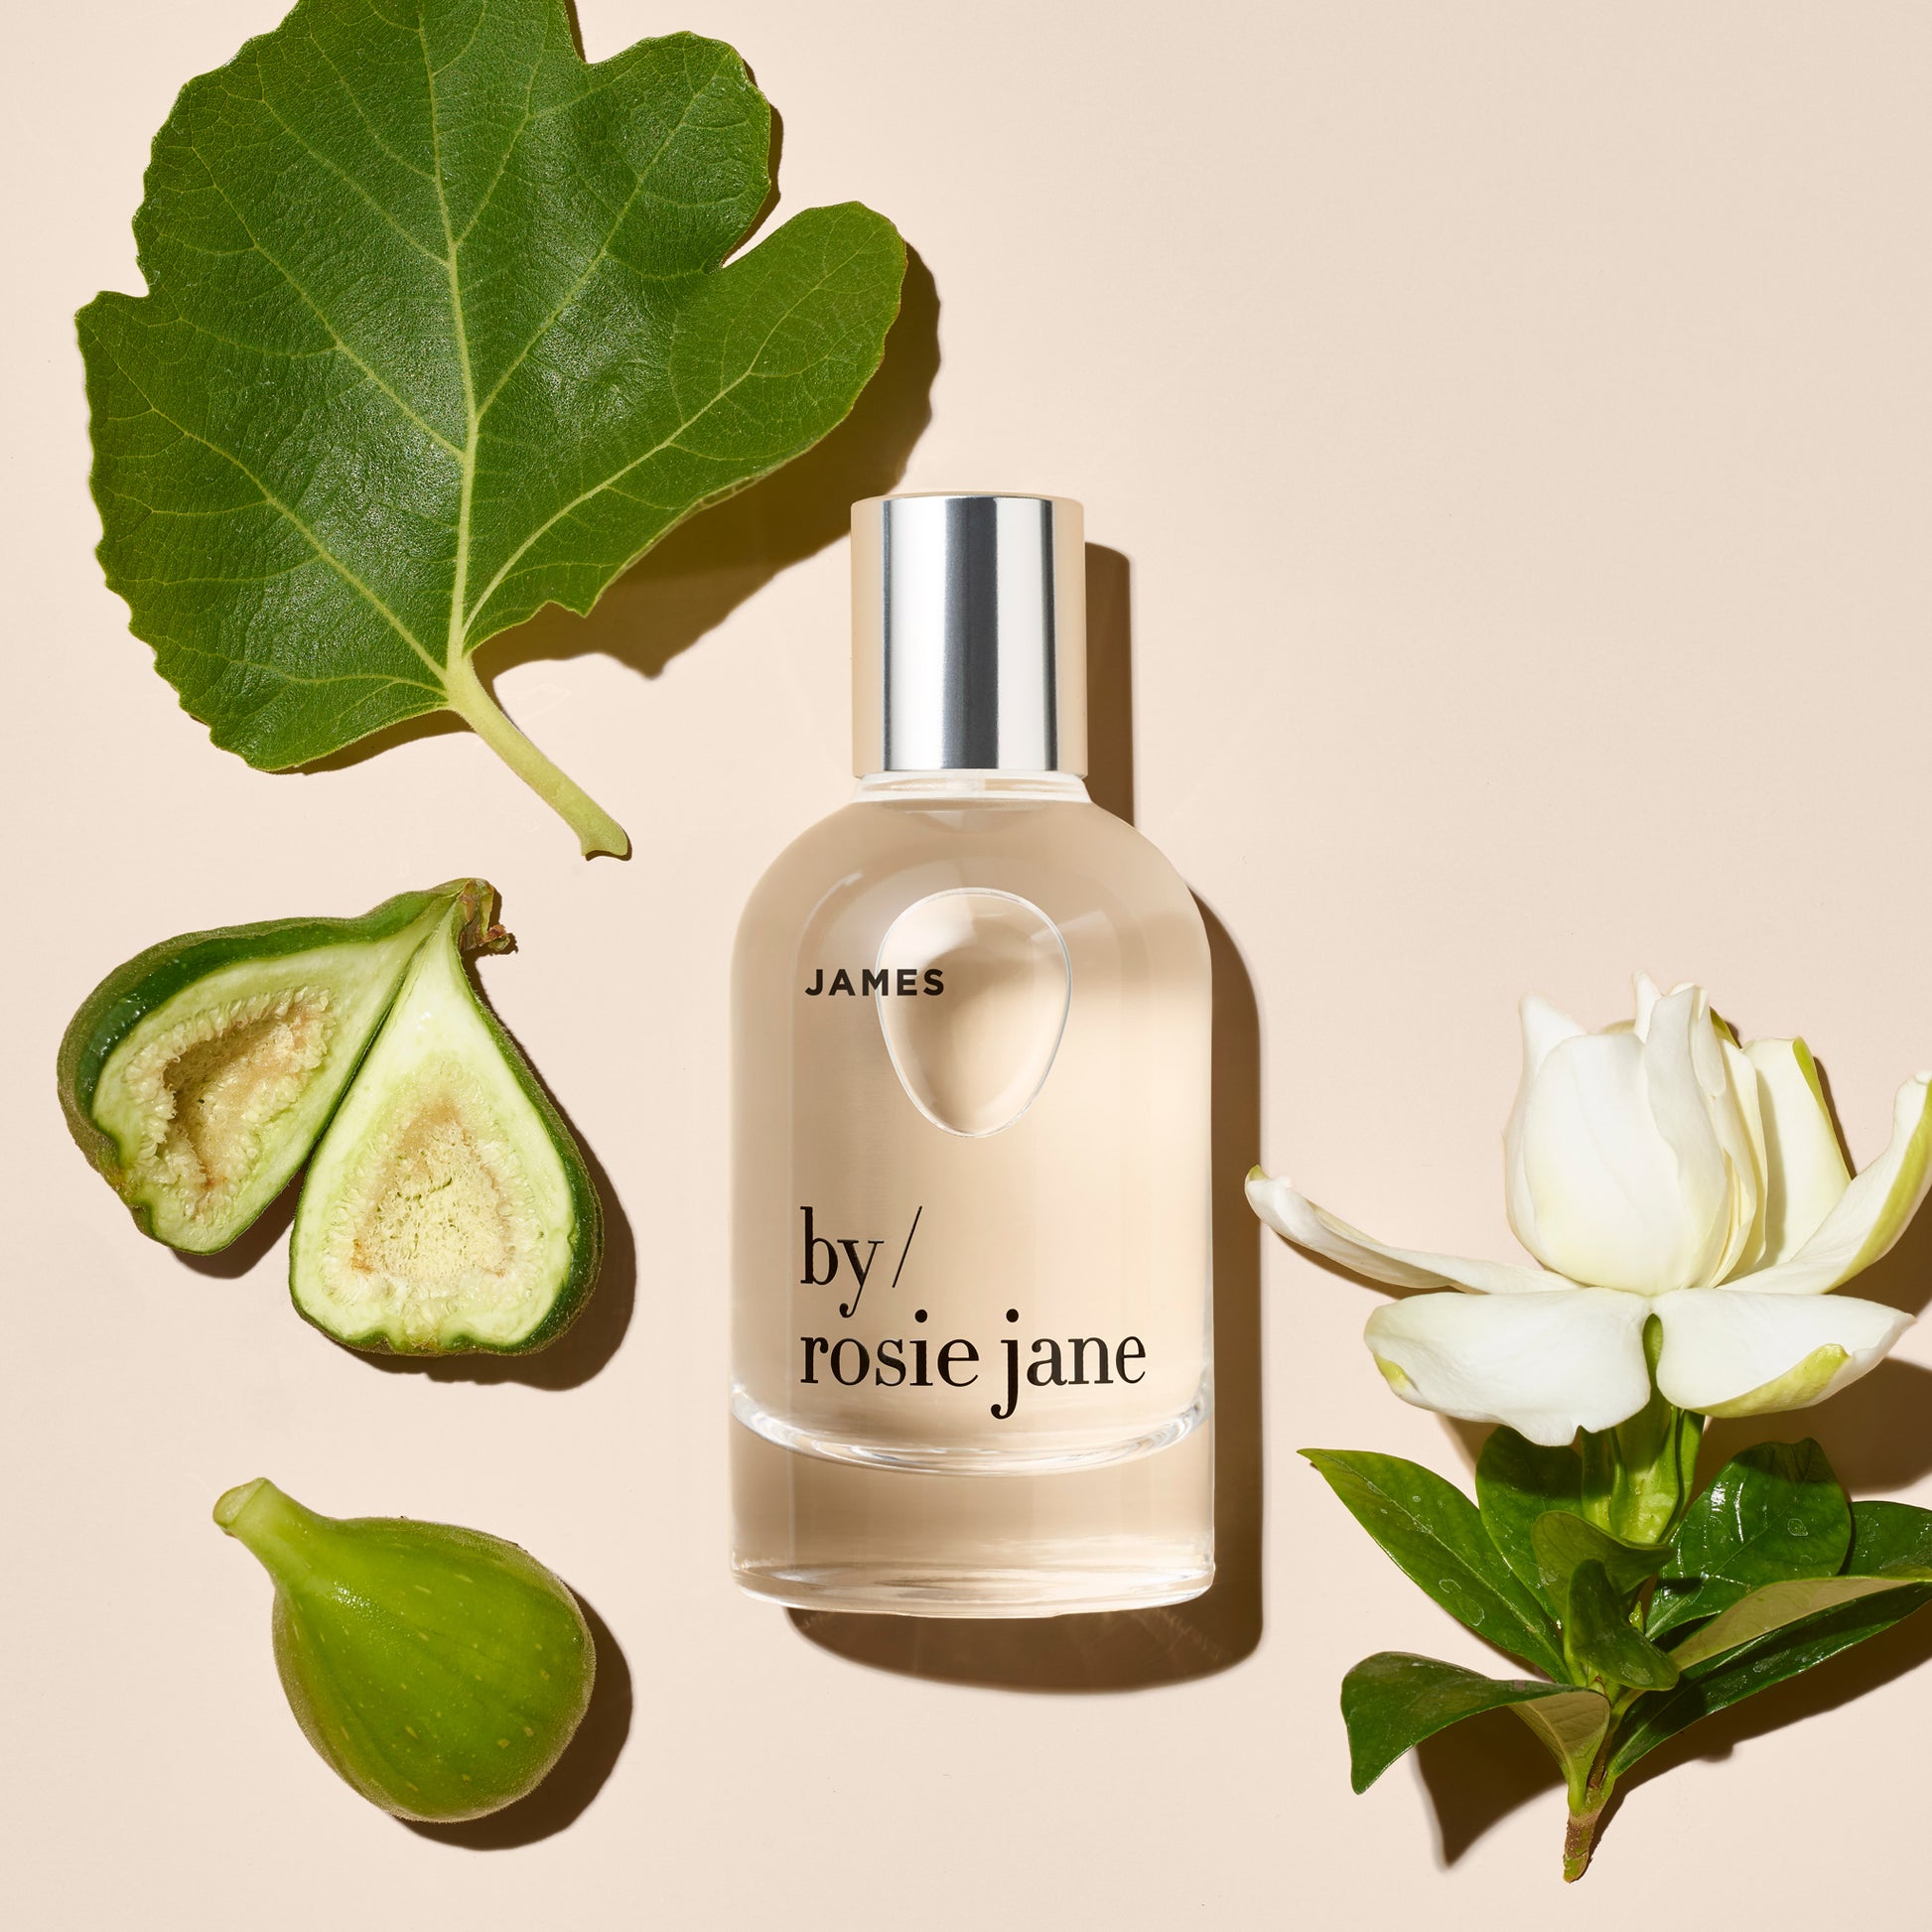 james perfume notes of fig